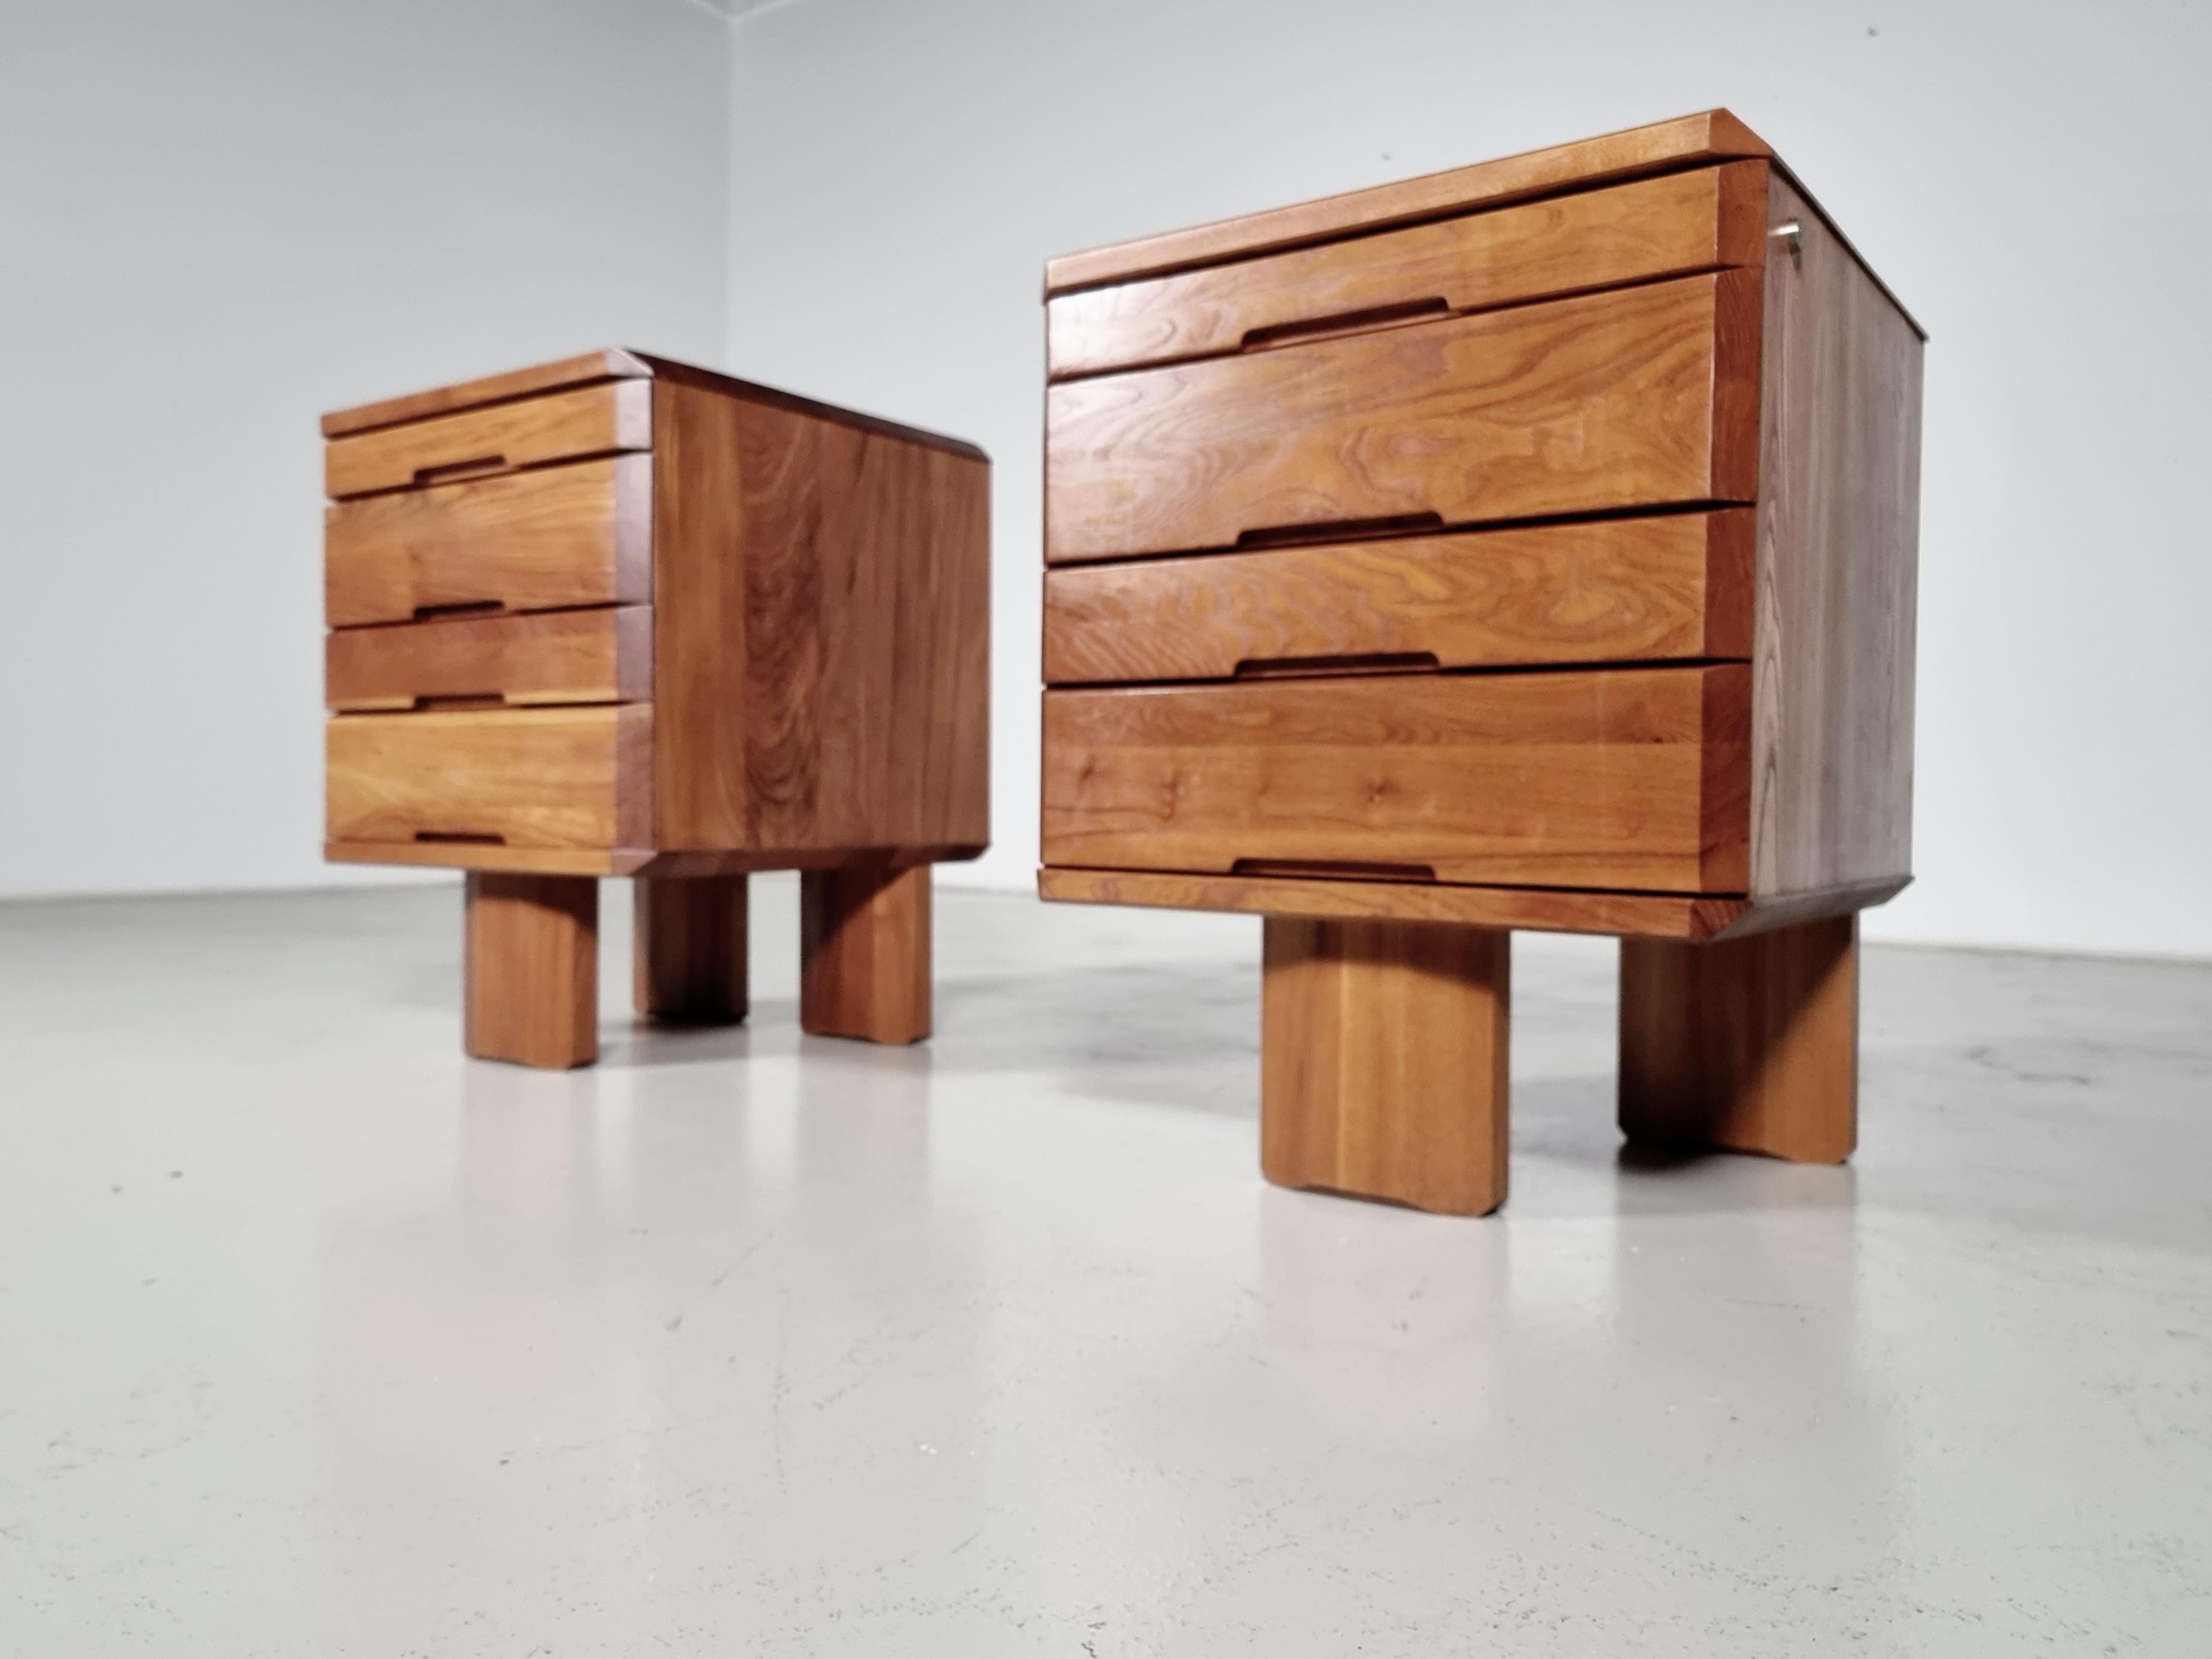 R40 Cabinets by Pierre Chapo in Solid Elm, France, 1970
.
Extremely rare version of the R40 cabinets. Probably custom-made for a client's office in the 1970s.  Both cabinets are signed by Pierre Chapo. One cabinet can be closed because it has a